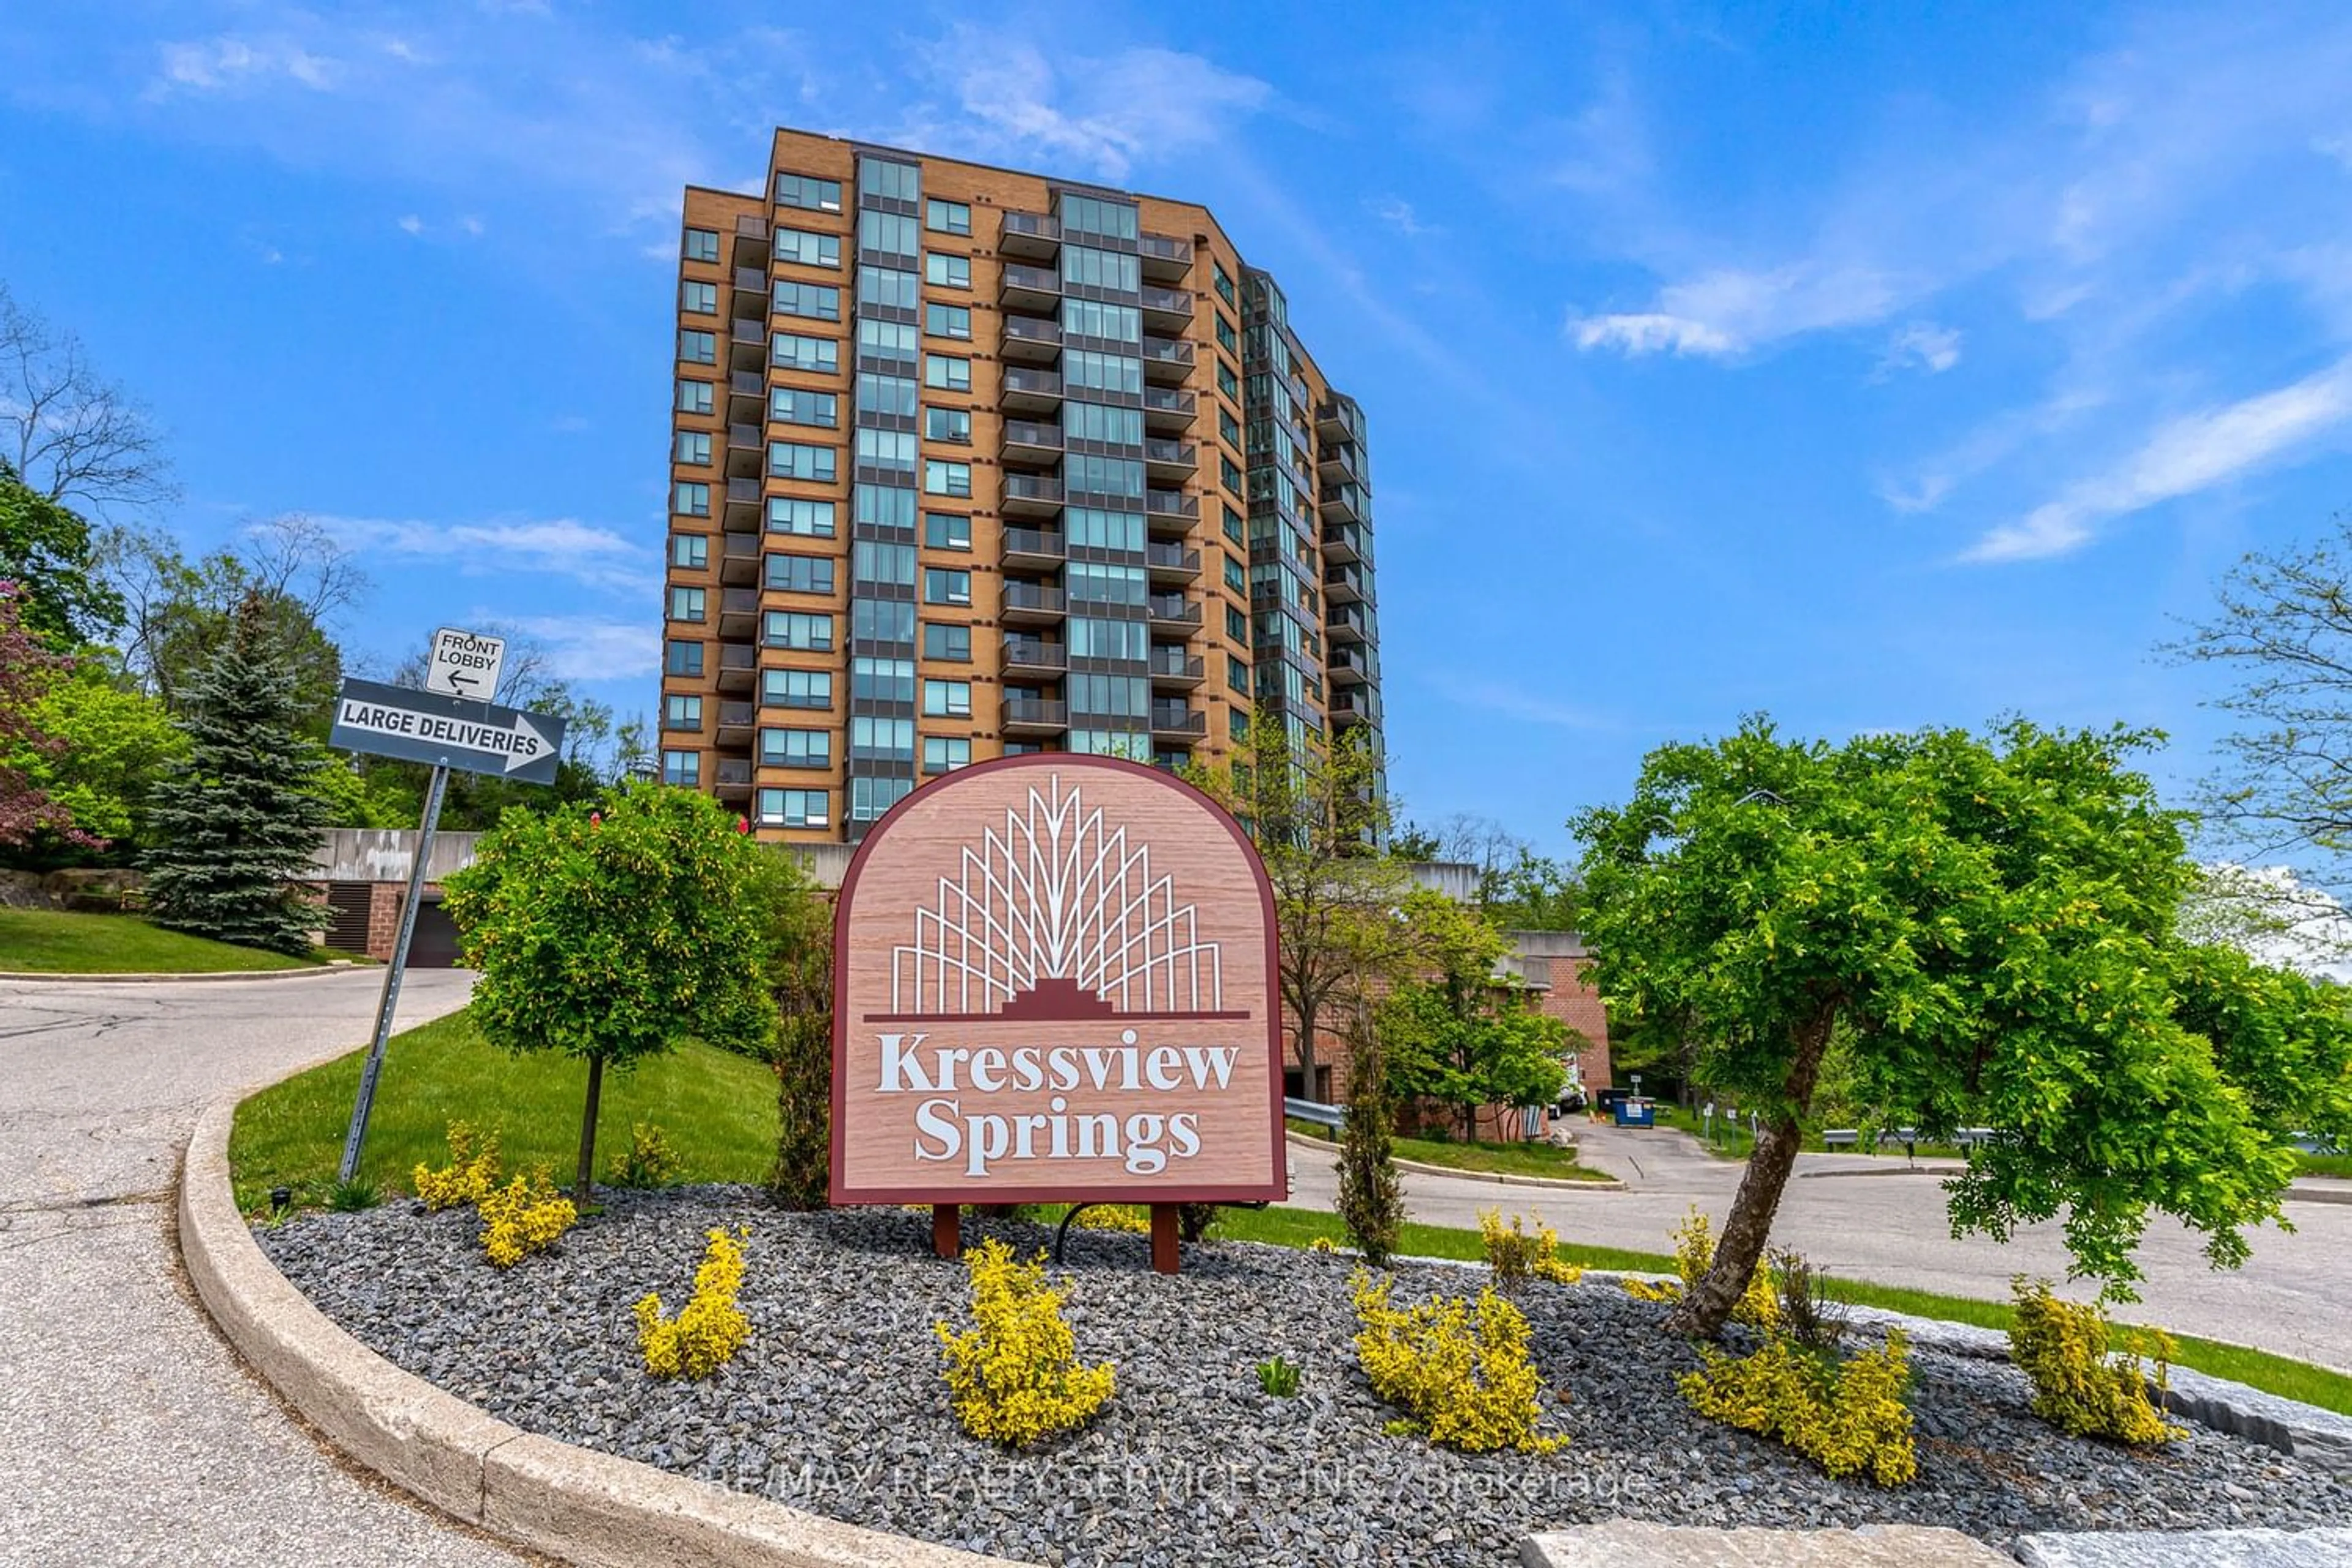 Lakeview for 237 King St #1207, Cambridge Ontario N3H 5L2